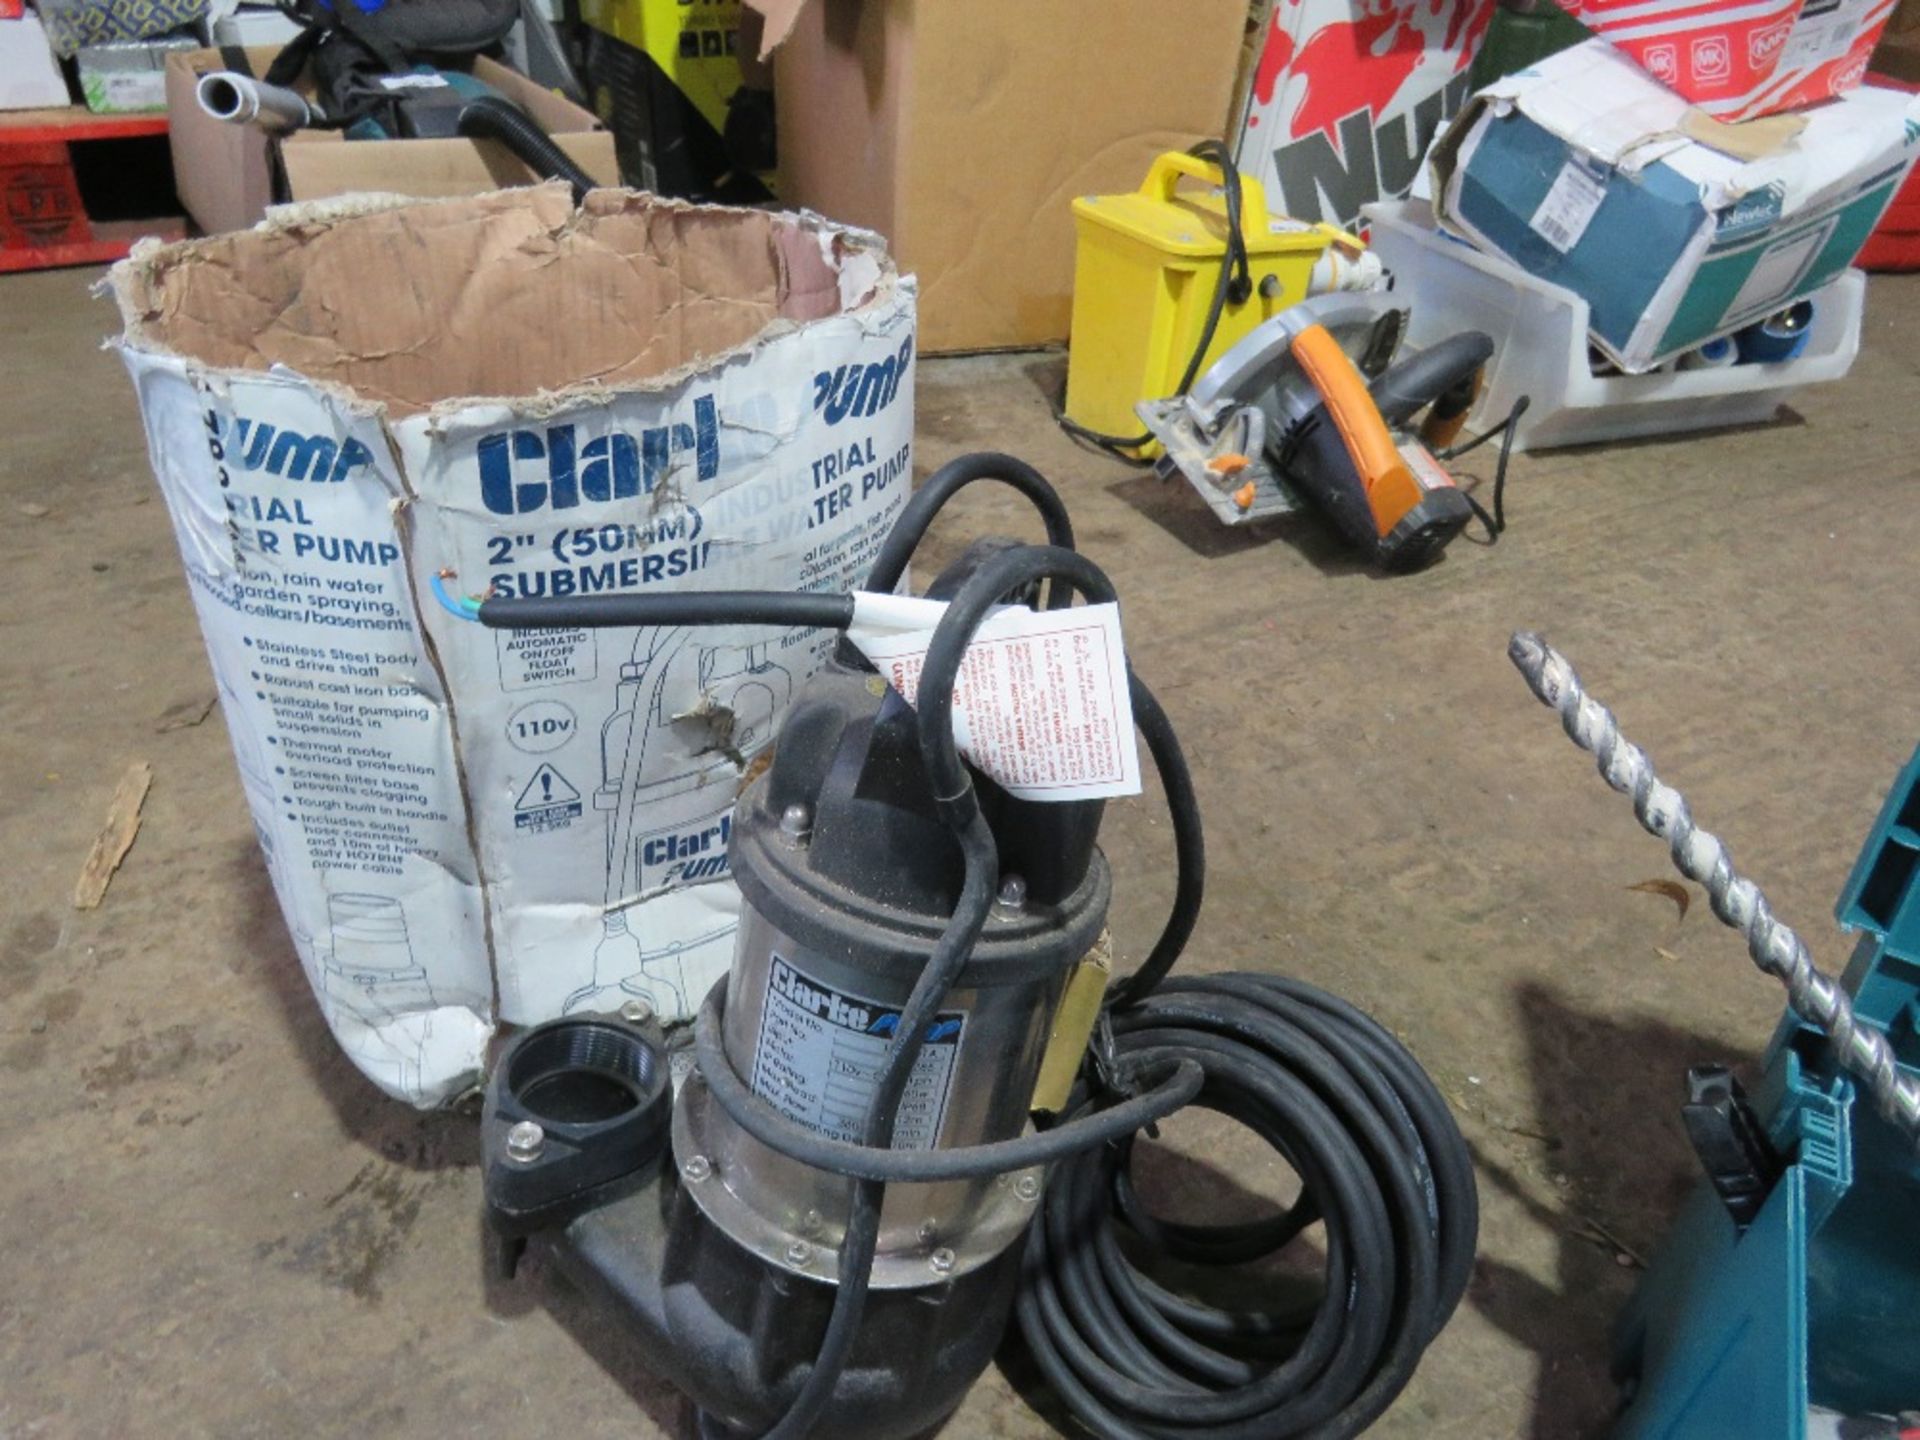 SUBMERSIBLE PUMP 110V AND BAG OF SUNDRIES. - Image 4 of 5